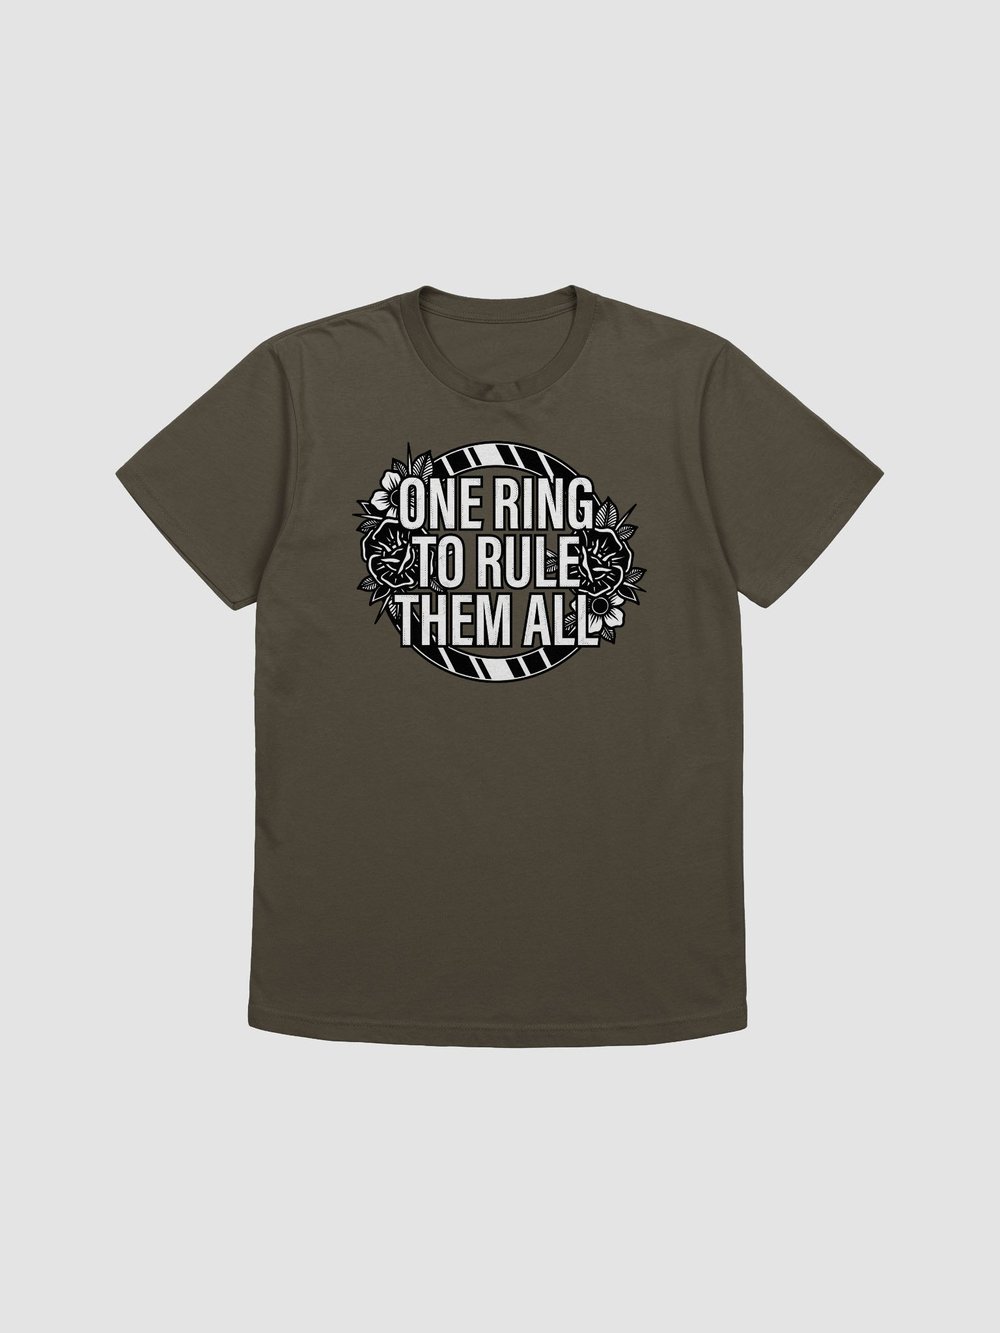 'One Ring' Tee